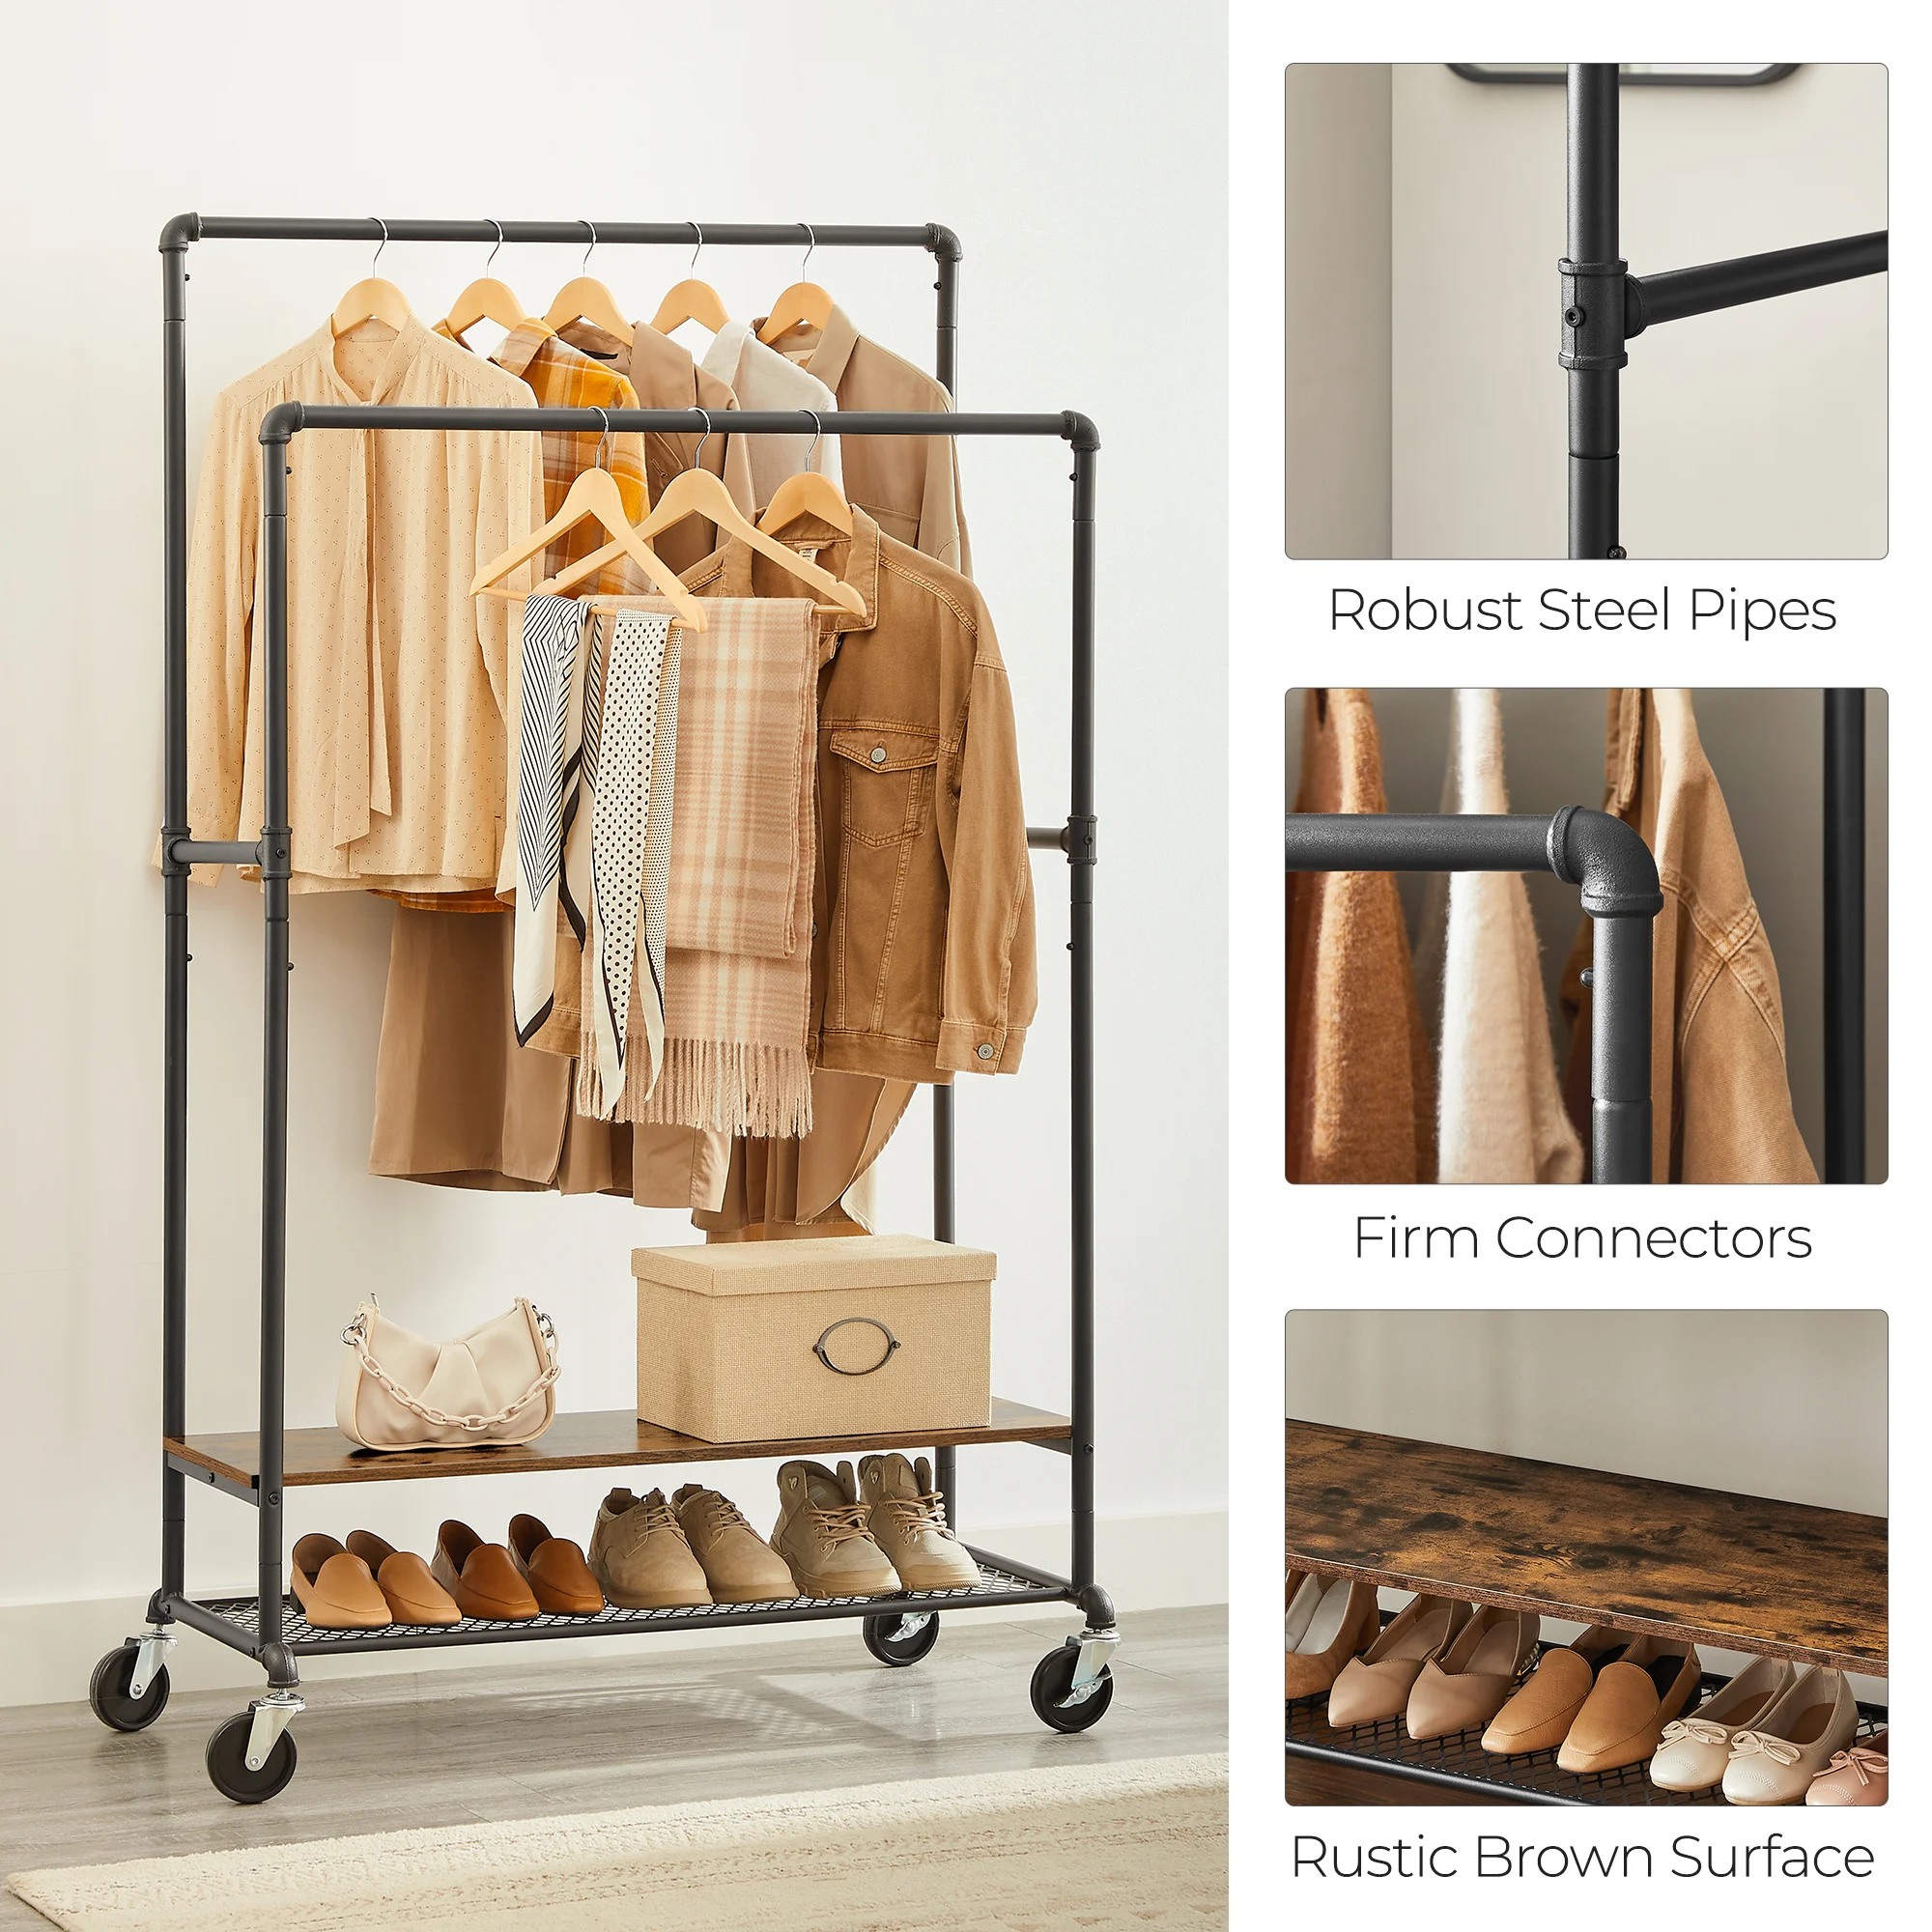 Industrial Design wood coat rack stand with Shoe Open Wardrobe Clothes Rail Rack clothes display rack for shop